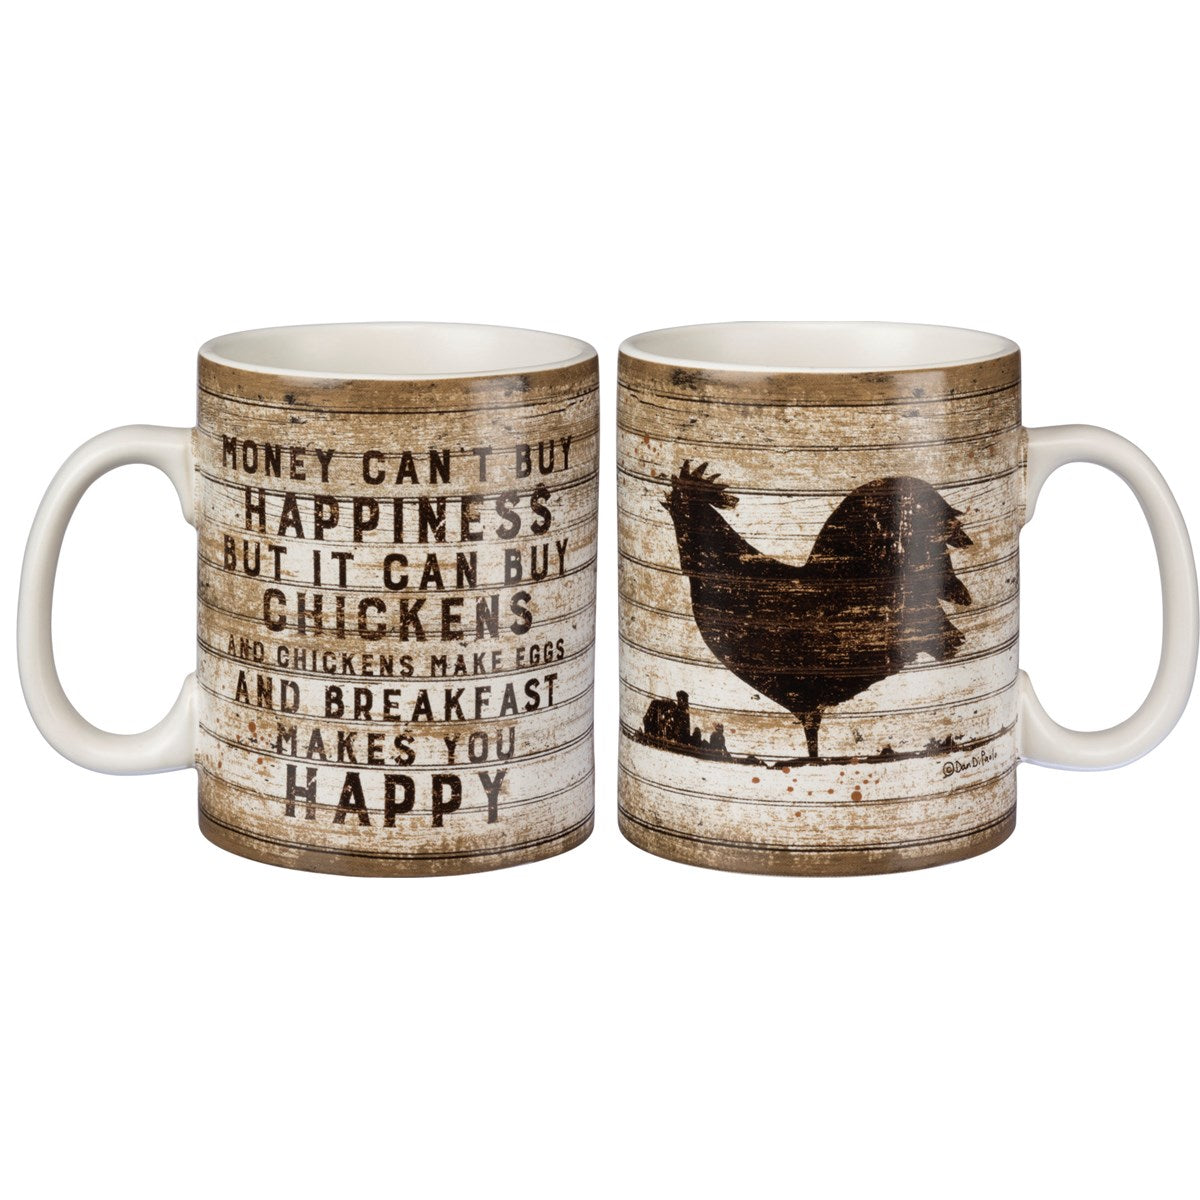 Primitives By Kathy - Mug Buy Happiness But It Can Buy Chickens